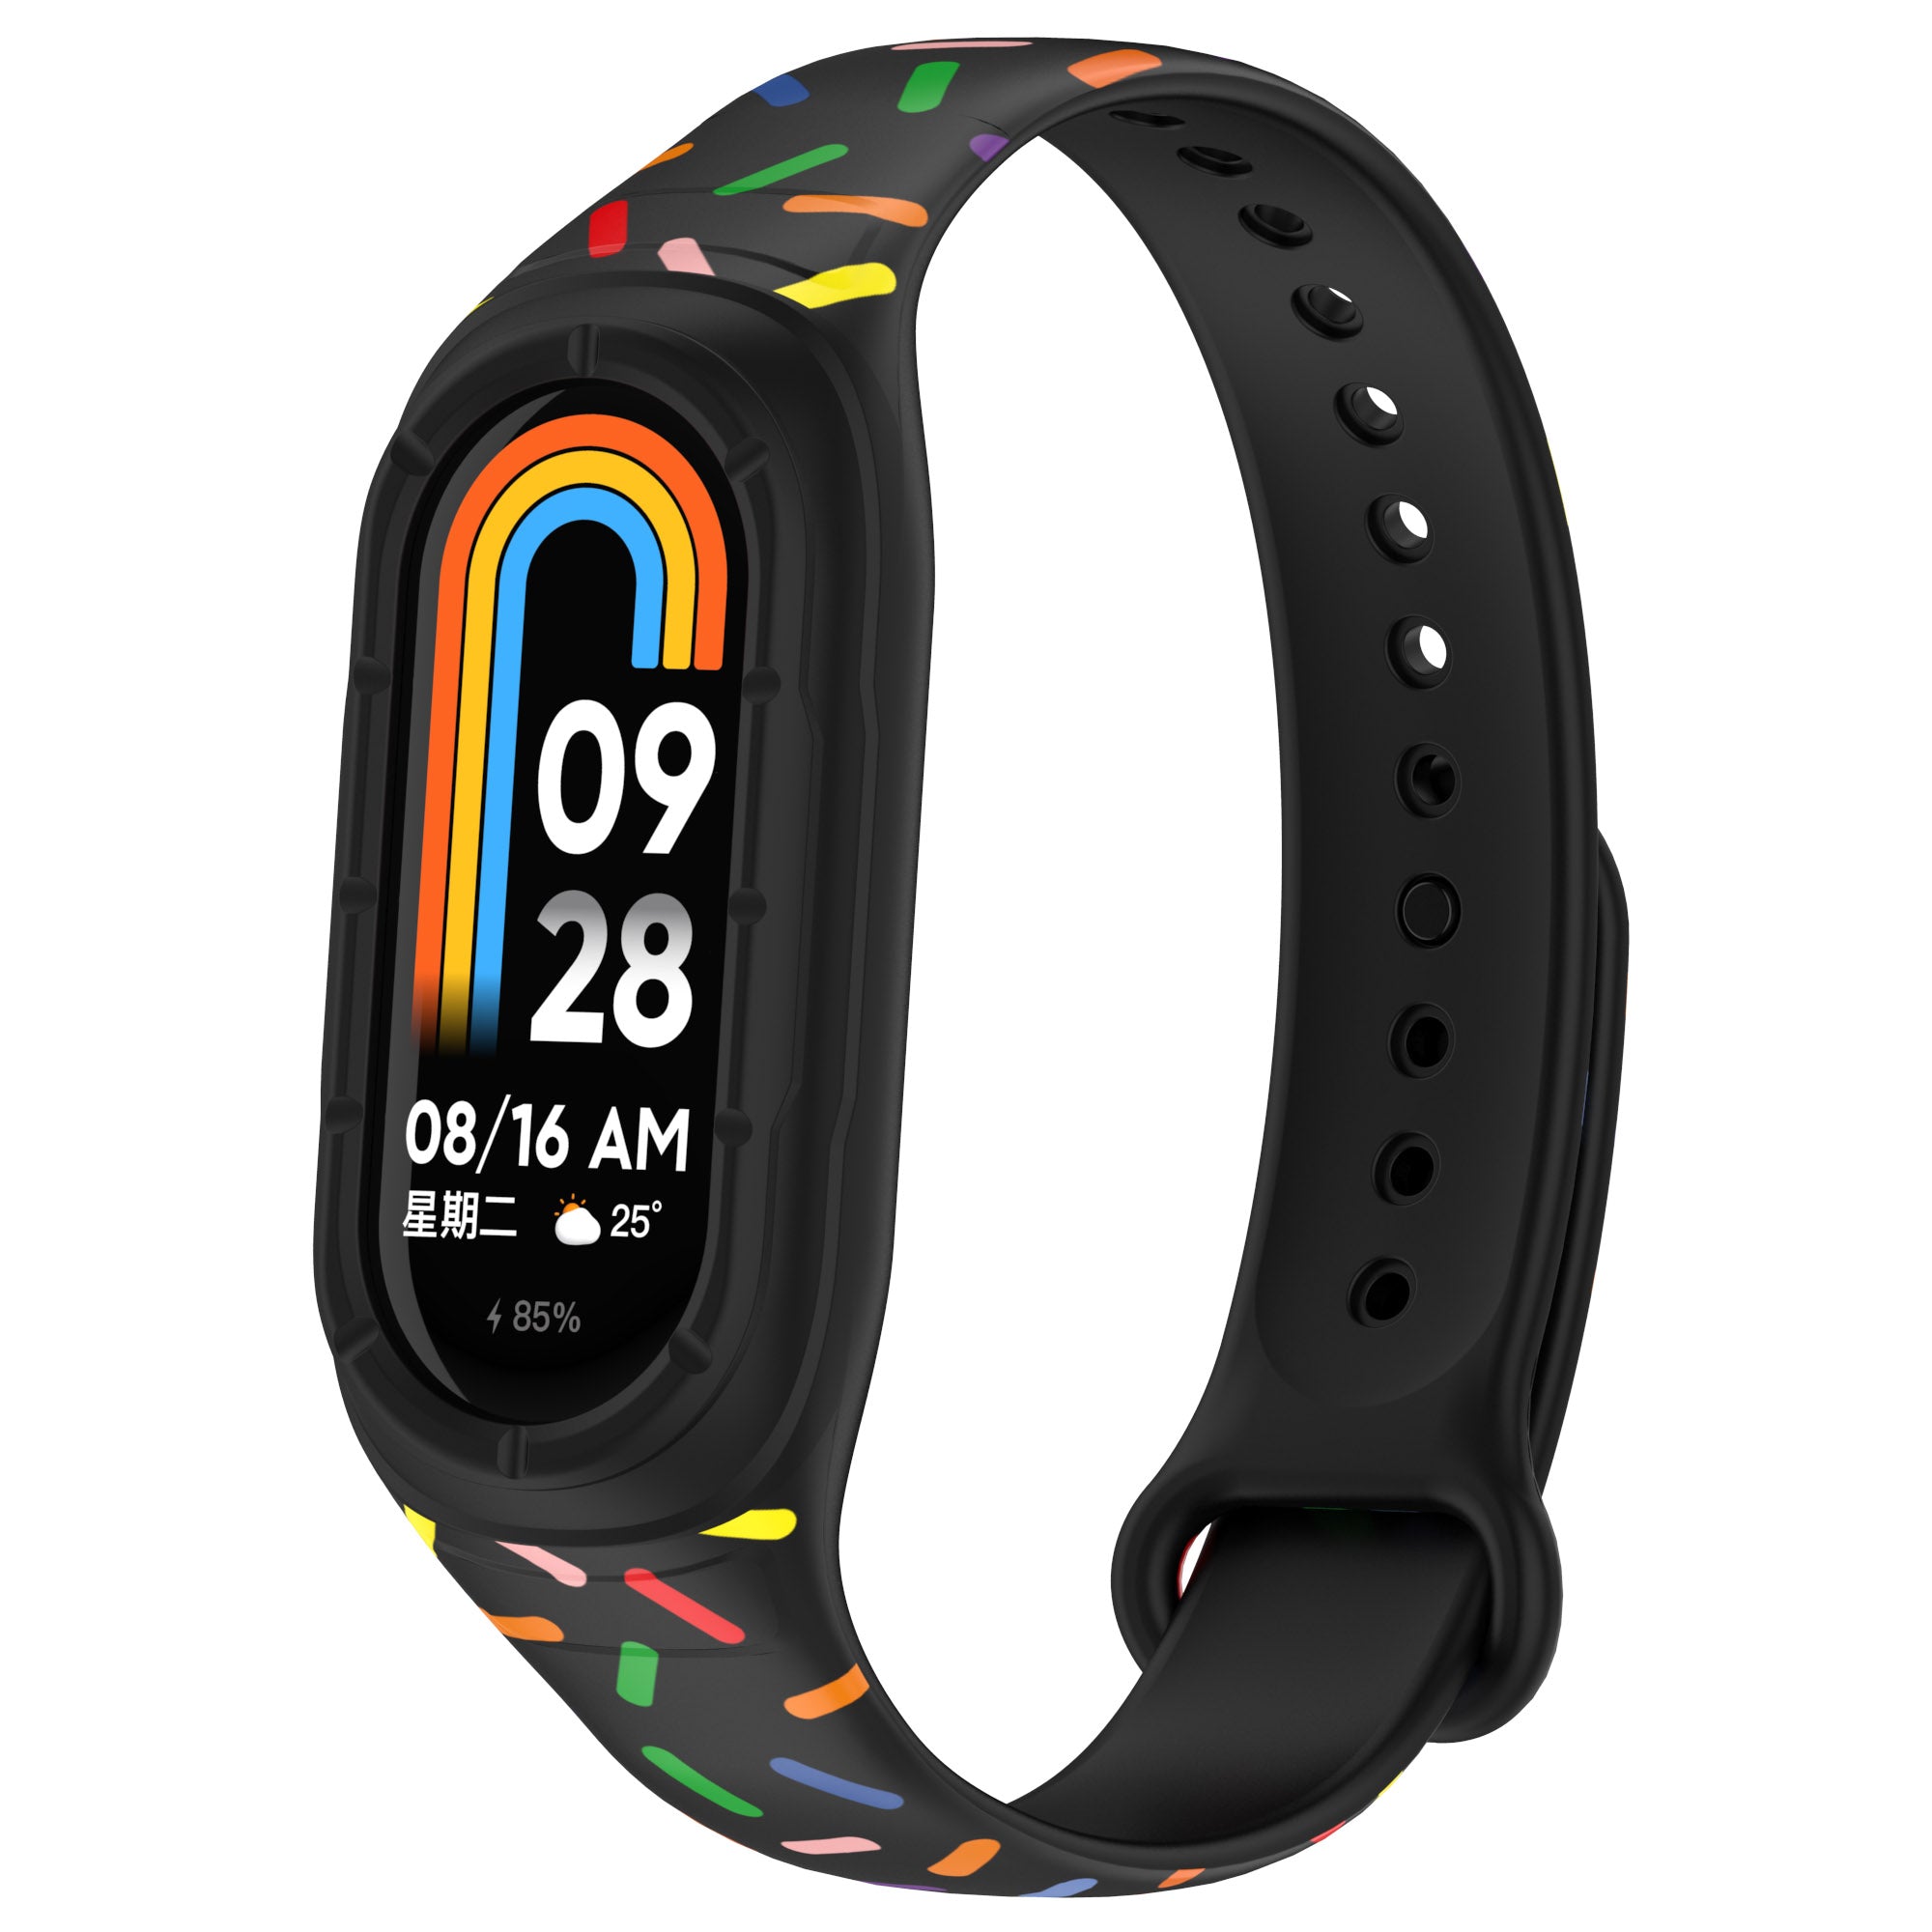 Uniqkart for Xiaomi Smart Band 8 Integrated Silicone Strap Colorful Spotted Replacement Wrist Band - Black